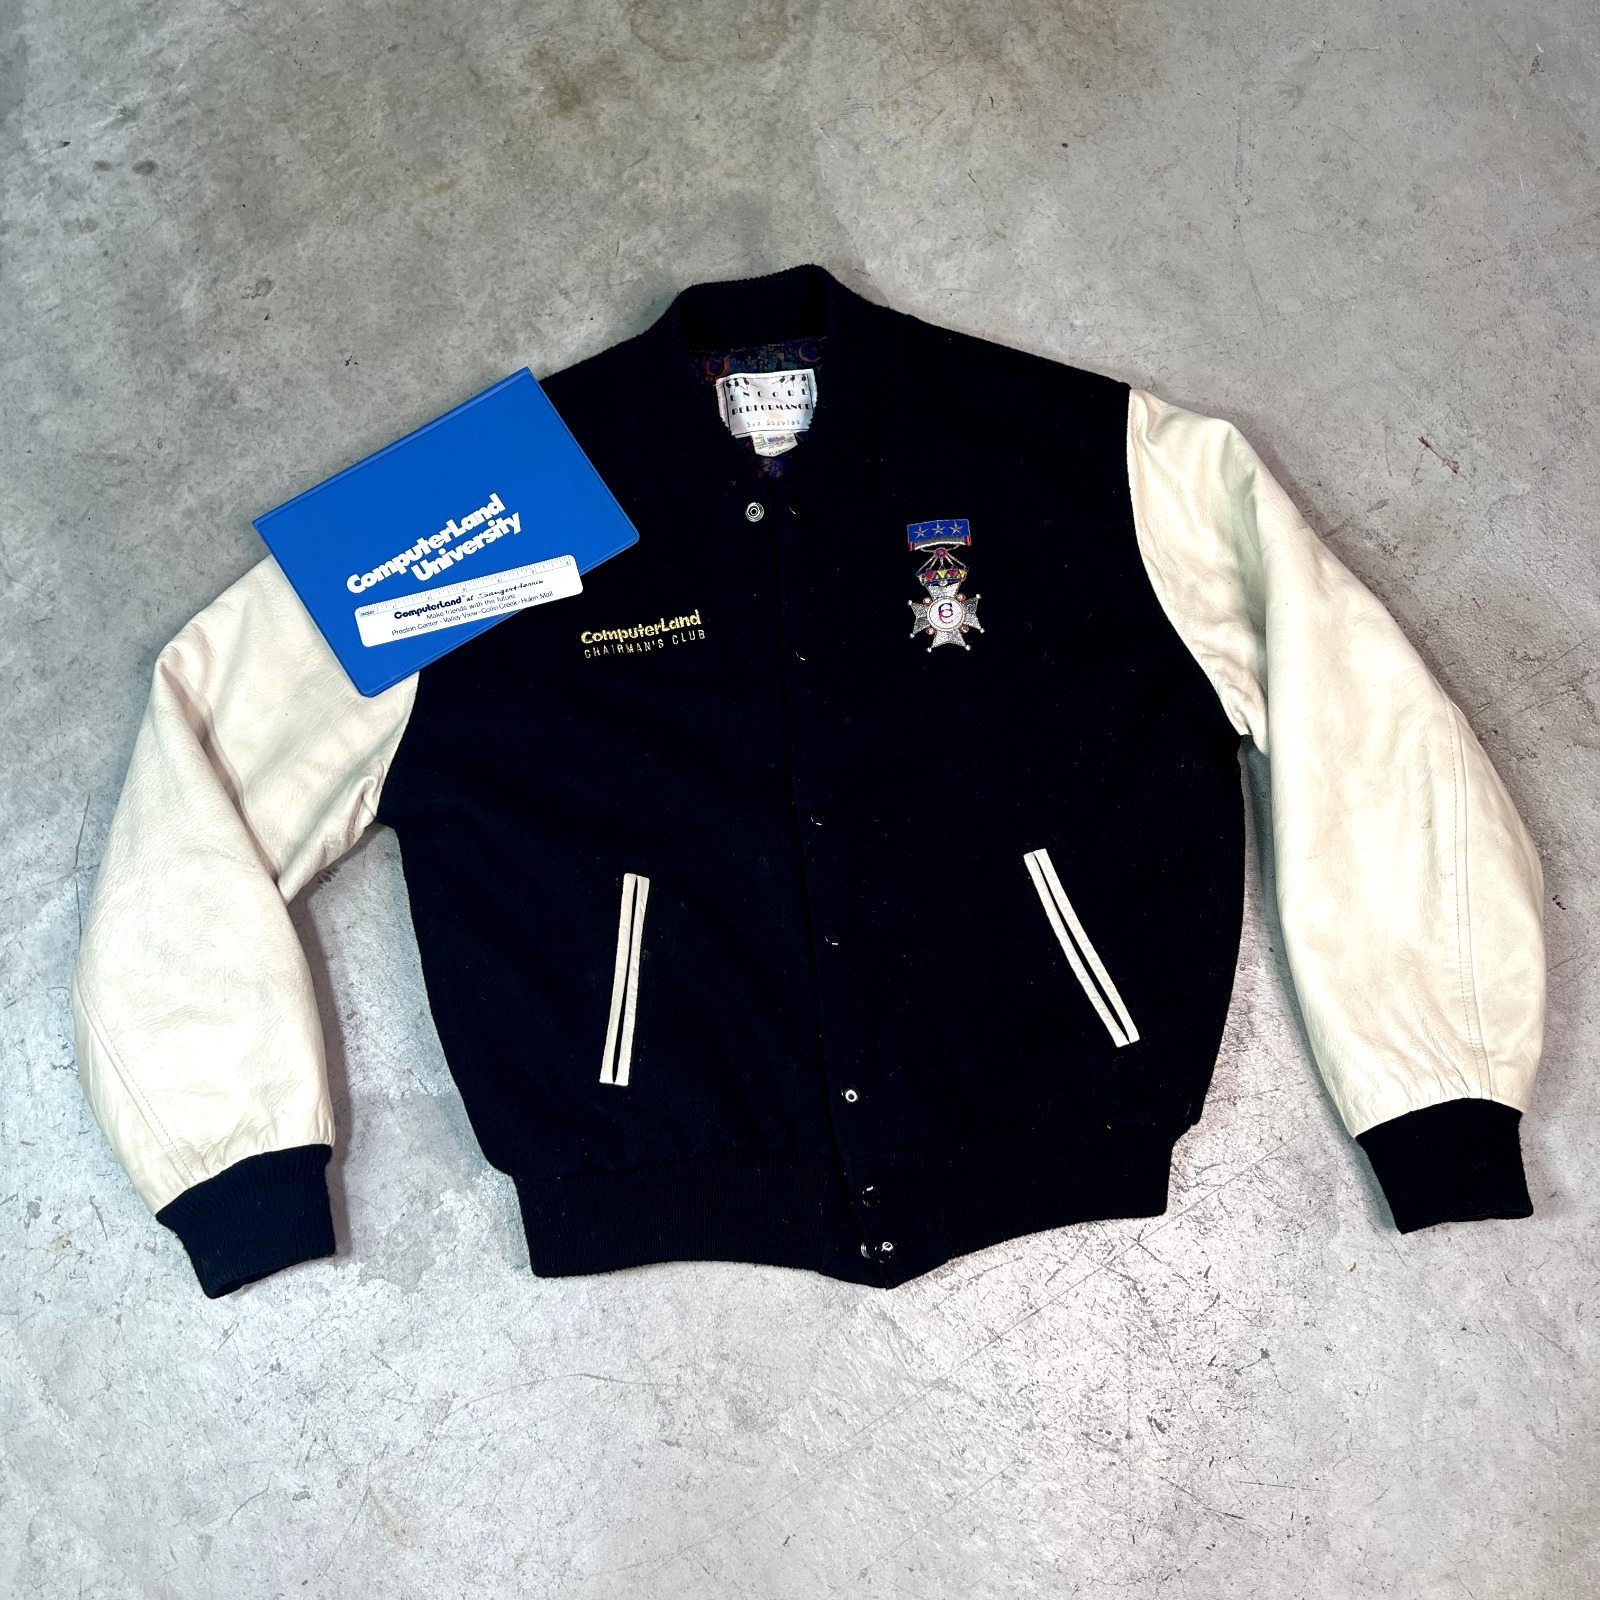 Vintage COMPUTERLAND Leather Jacket Early APPLE COMPUTER STORE MAC IBM PC 1992 s